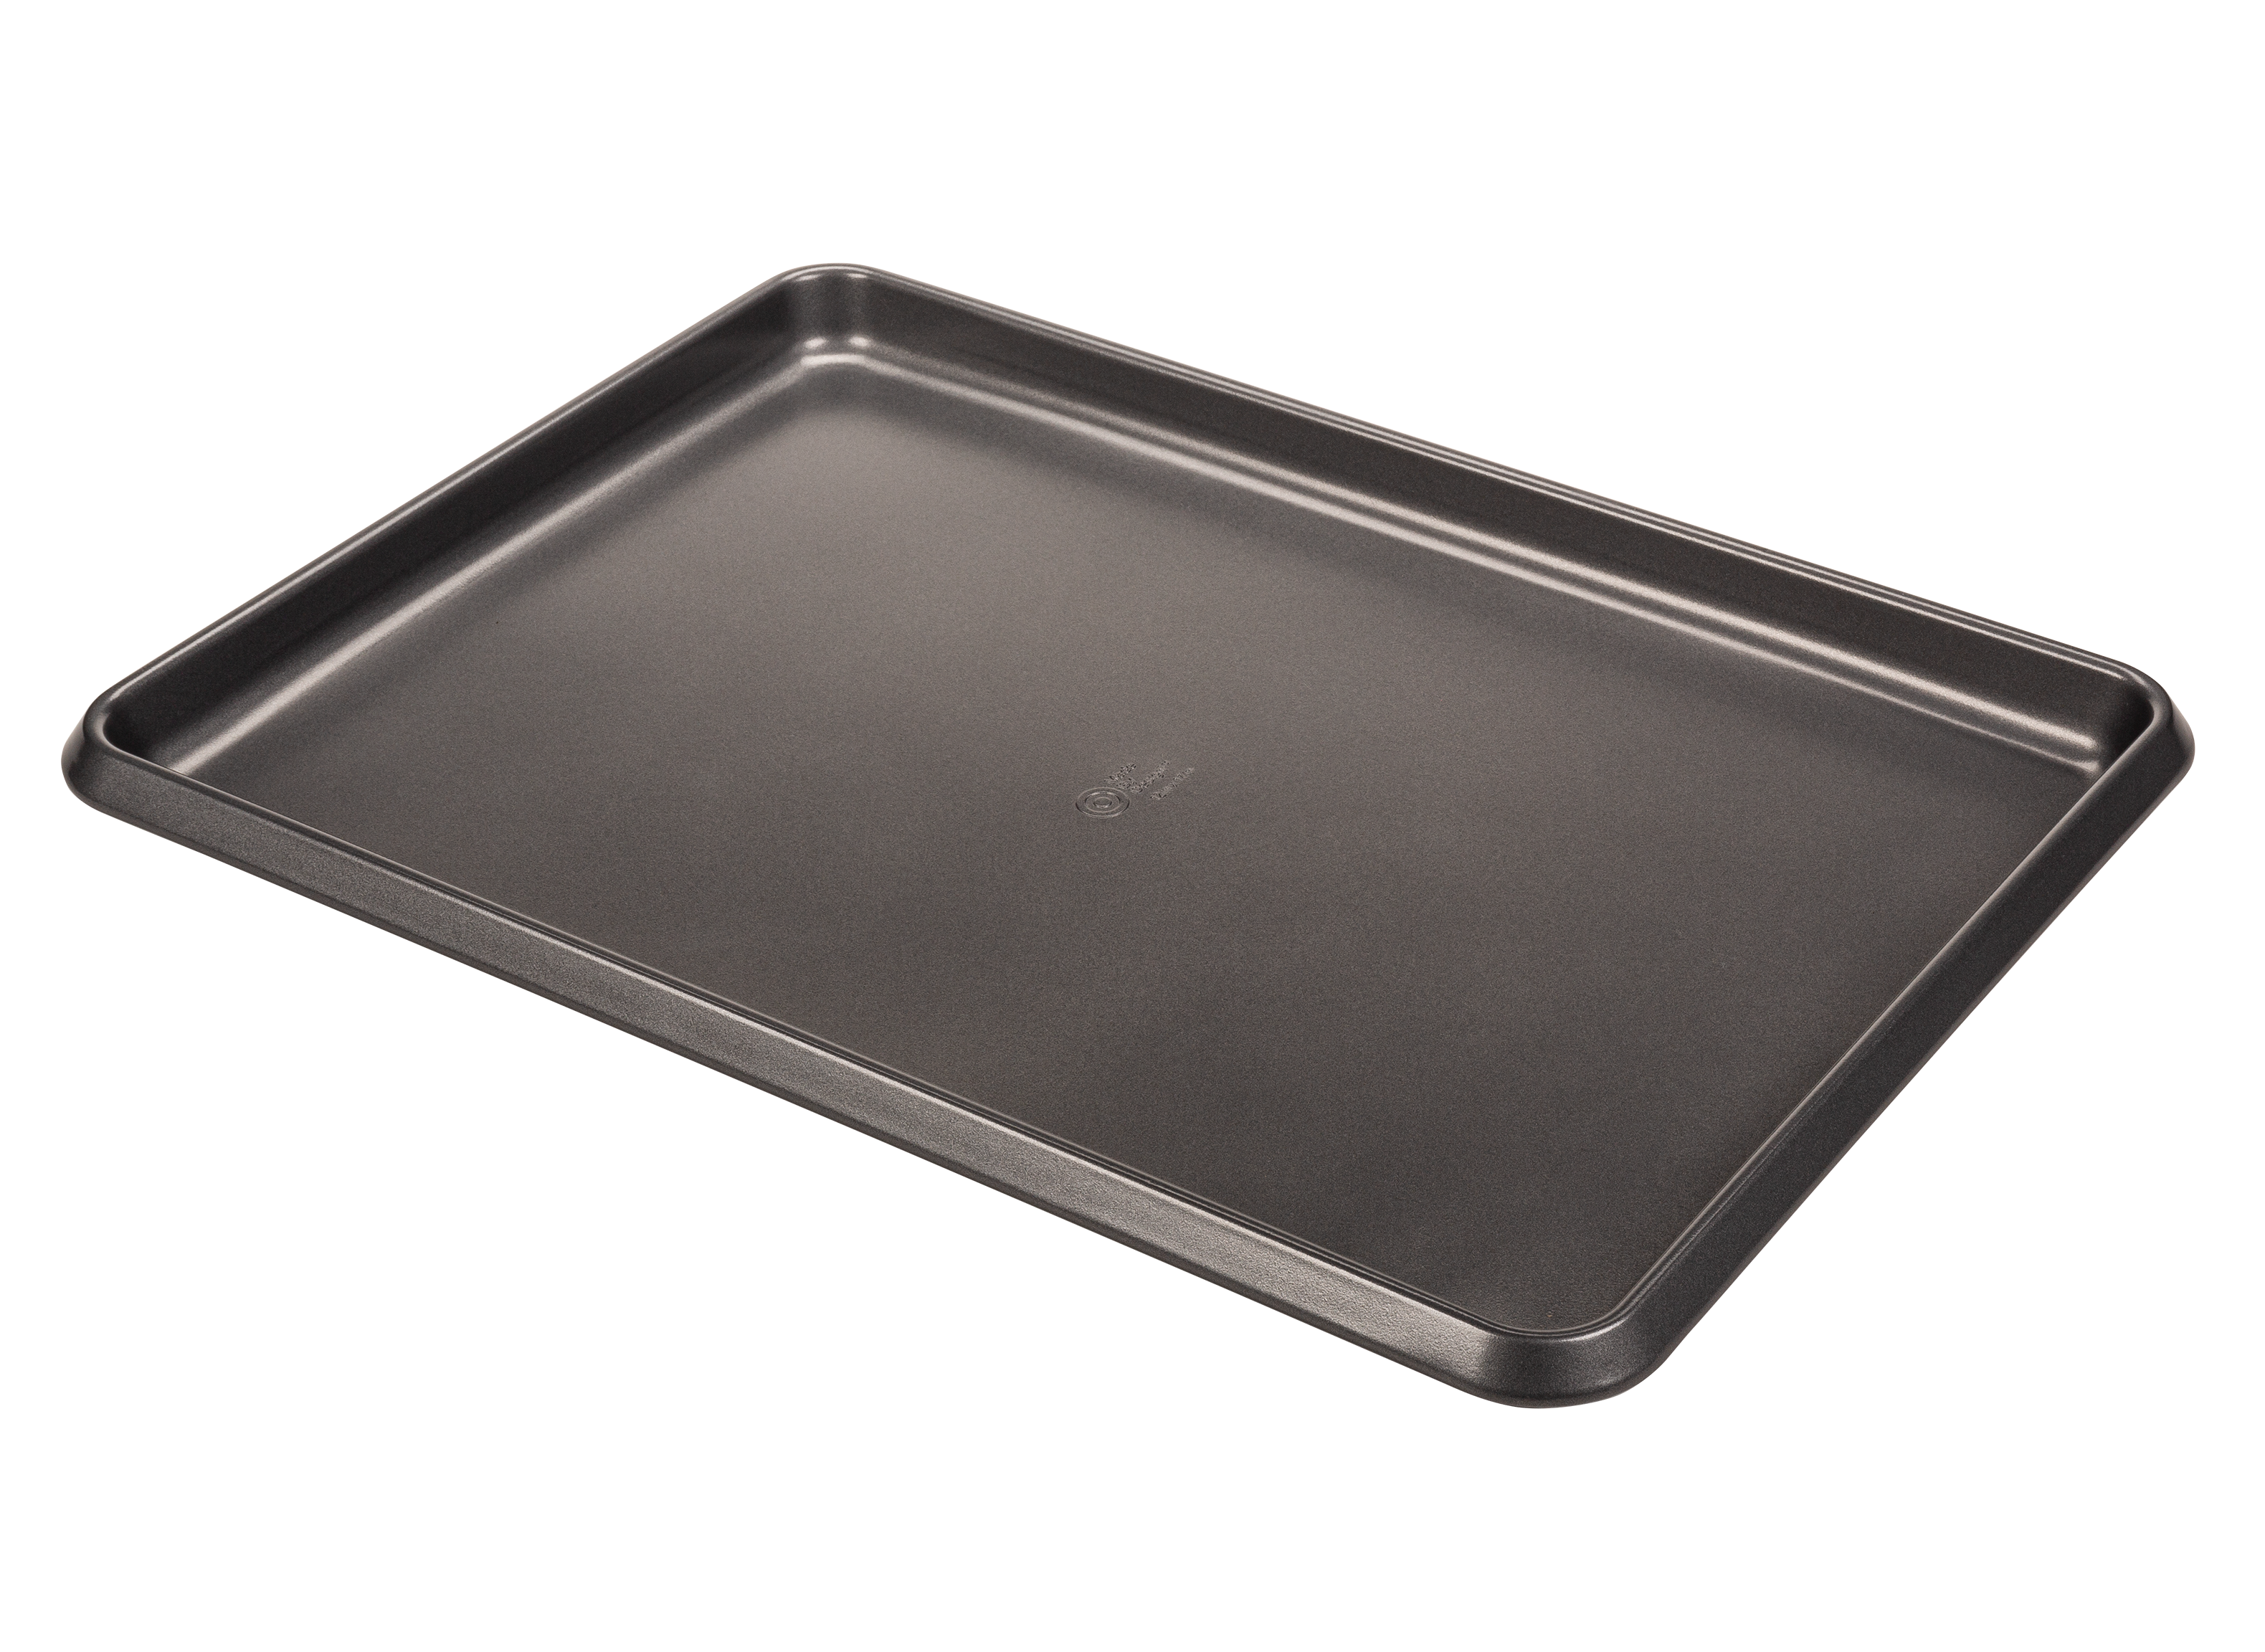 https://crdms.images.consumerreports.org/prod/products/cr/models/404168-sheet-pans-made-by-design-target-non-stick-jumbo-cookie-sheet-10022102.png